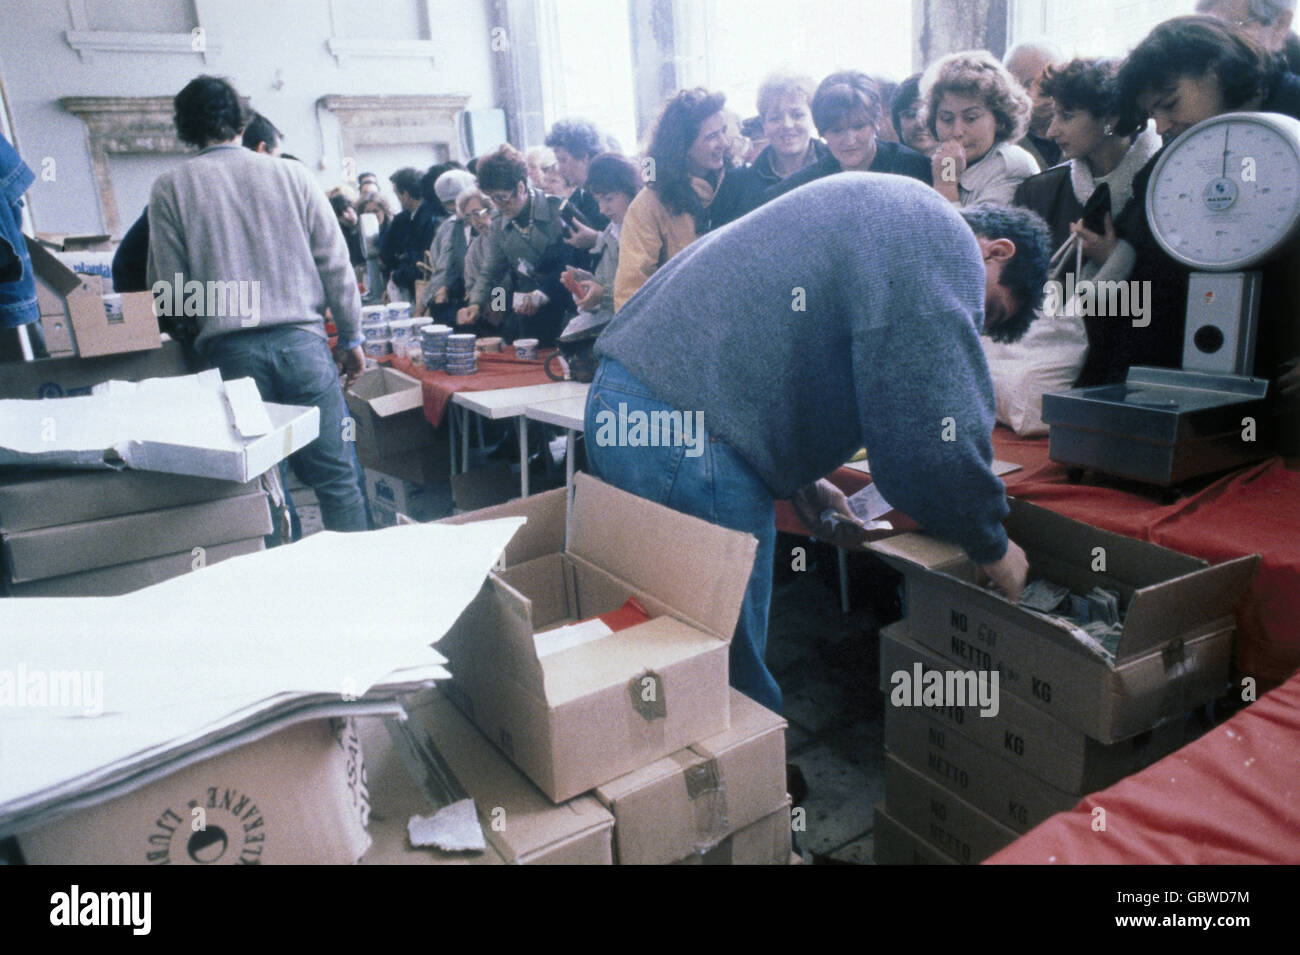 events, Croatian War of Independence 1991 - 1995, crowd at the market at Diocletian's Palace, Split, 21.12.1992, Yugoslavia, Yugoslav Wars, Balkans, conflict, people, misery, lack of supply, trade, Croatia, 1990s, 90s, 20th century, historic, historical, Additional-Rights-Clearences-Not Available Stock Photo